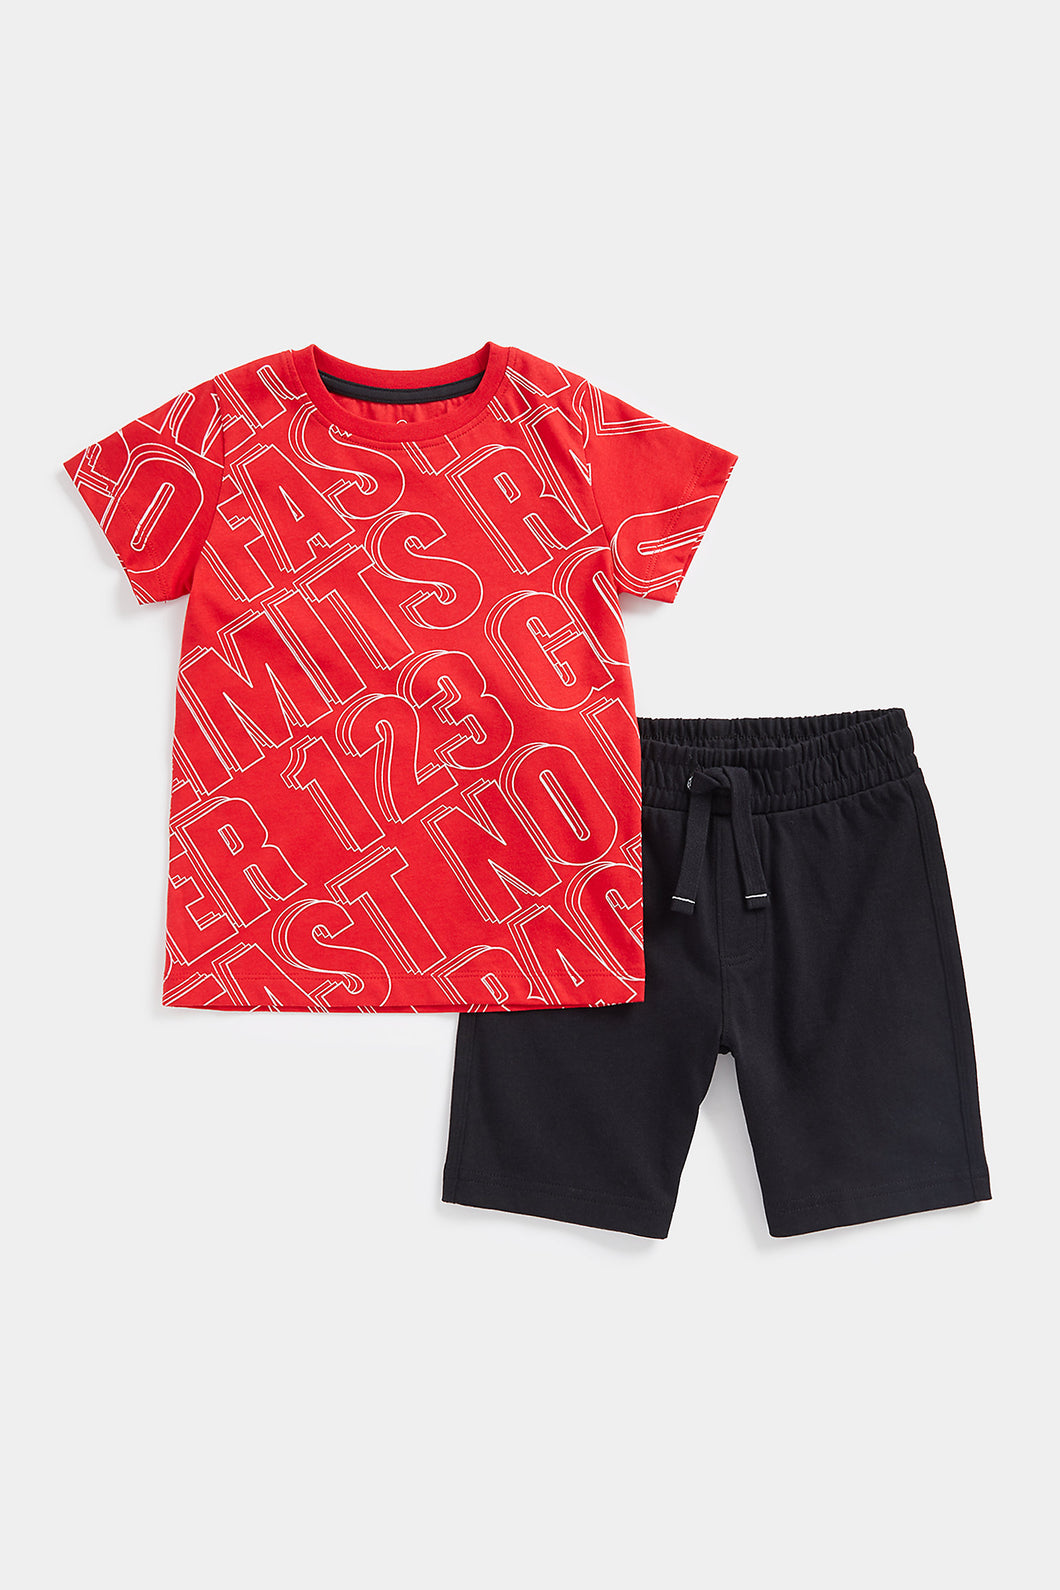 Mothercare Race T-Shirt and Shorts Set